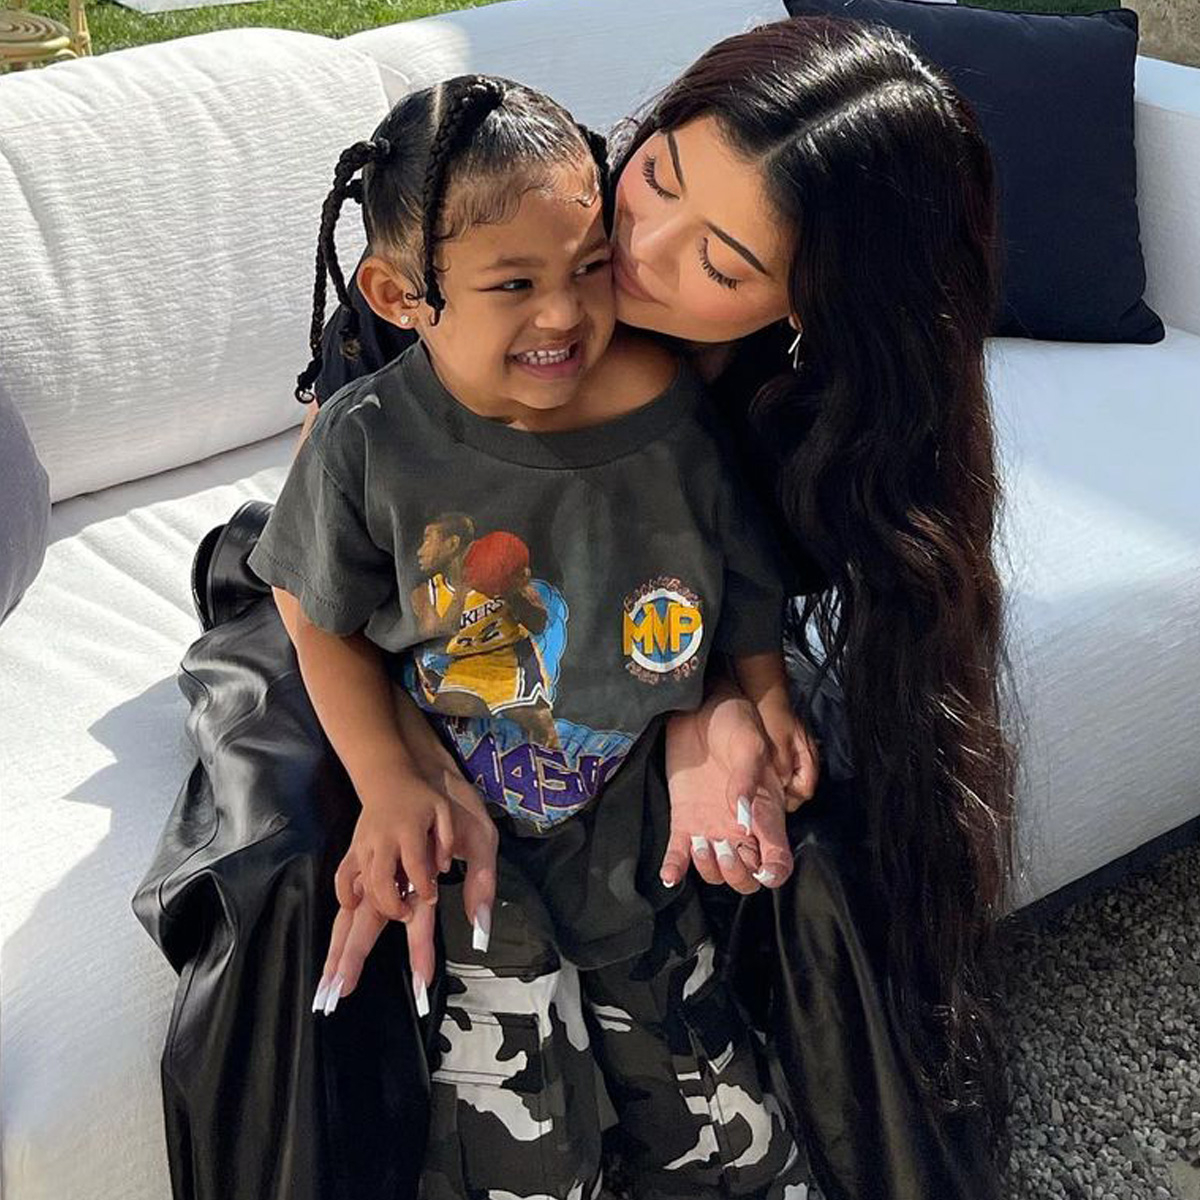 Kylie Jenner’s Son and Daughter Stormi Steal the Show in New TikTok